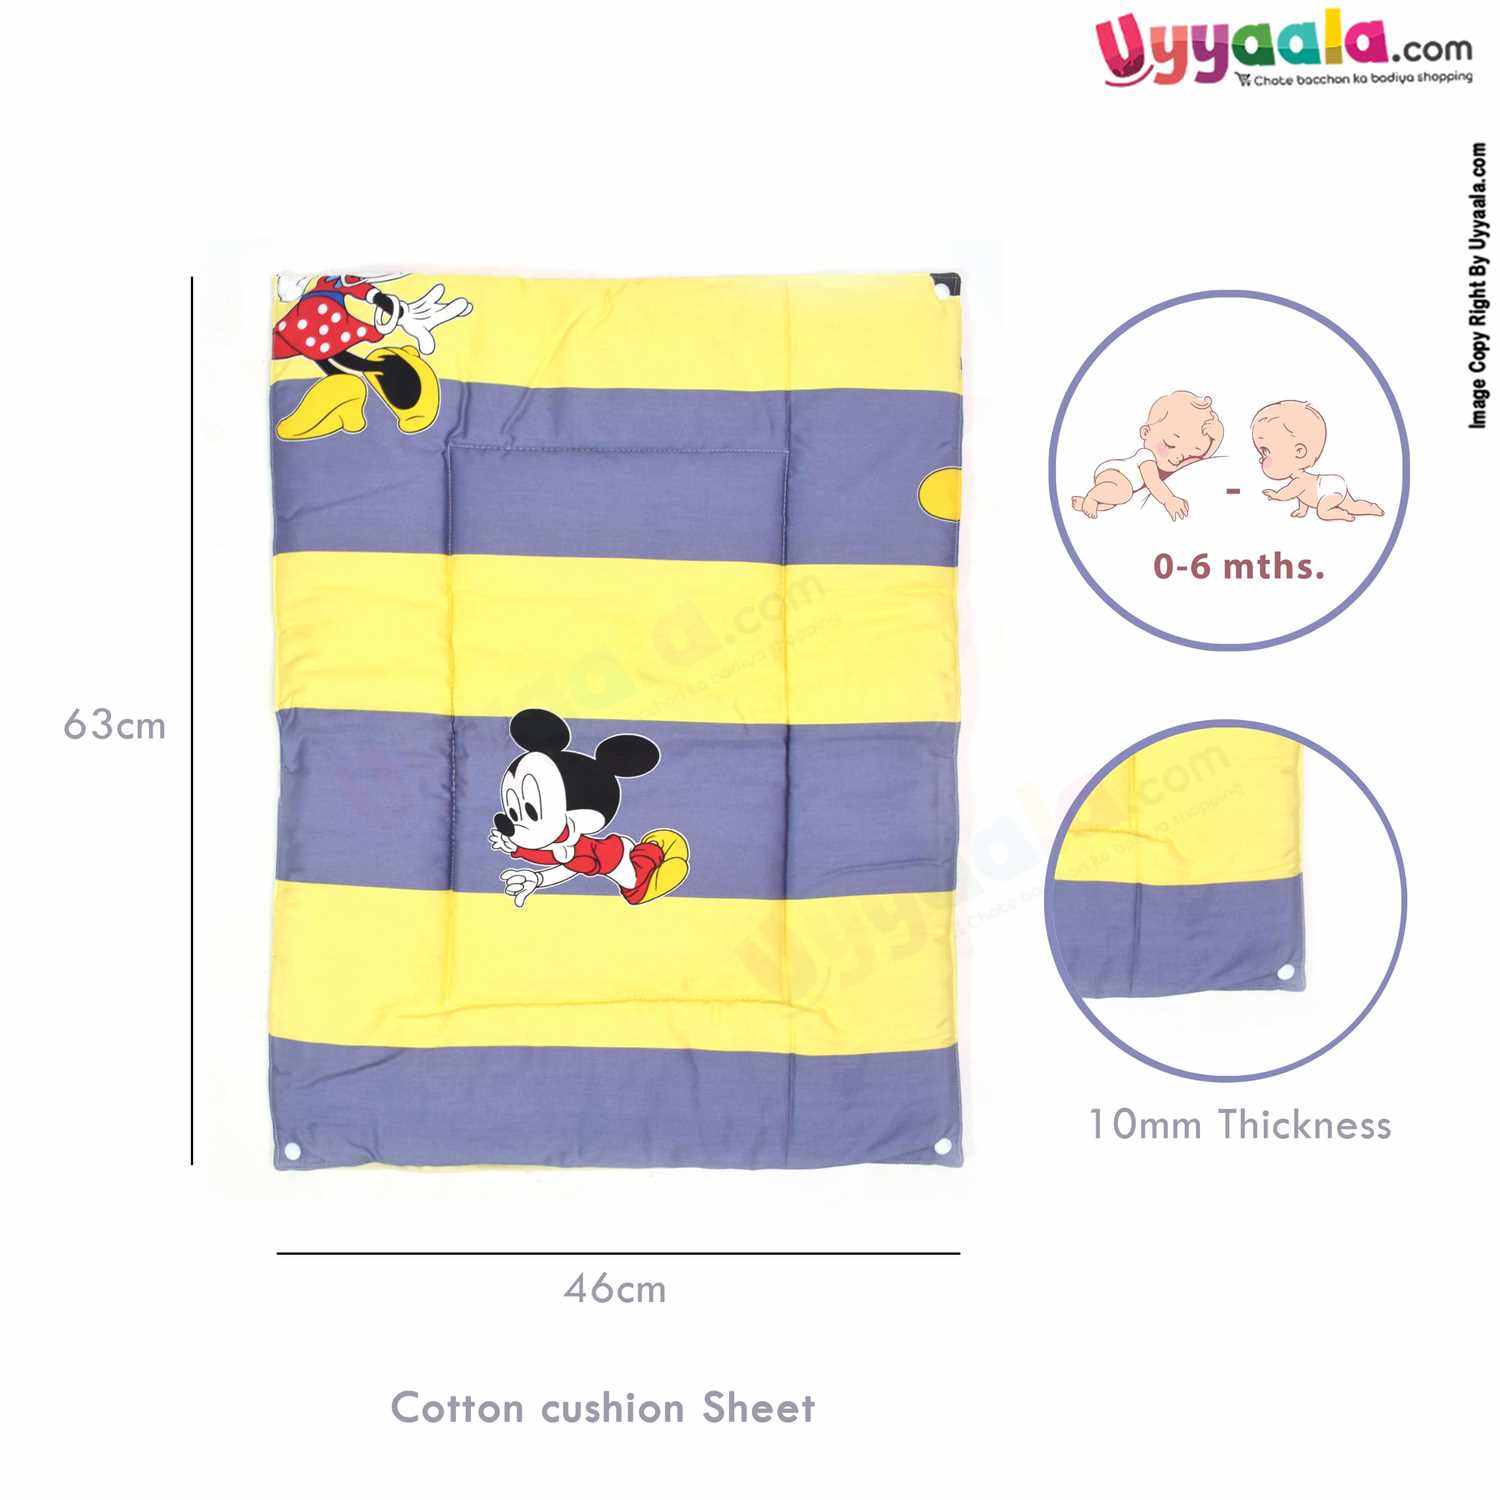 Cotton Foam Cushioned & Plastic detachable Changing Sheets 3+1 Set with Micky Mouse Print,0-6m  - Yellow & Grey